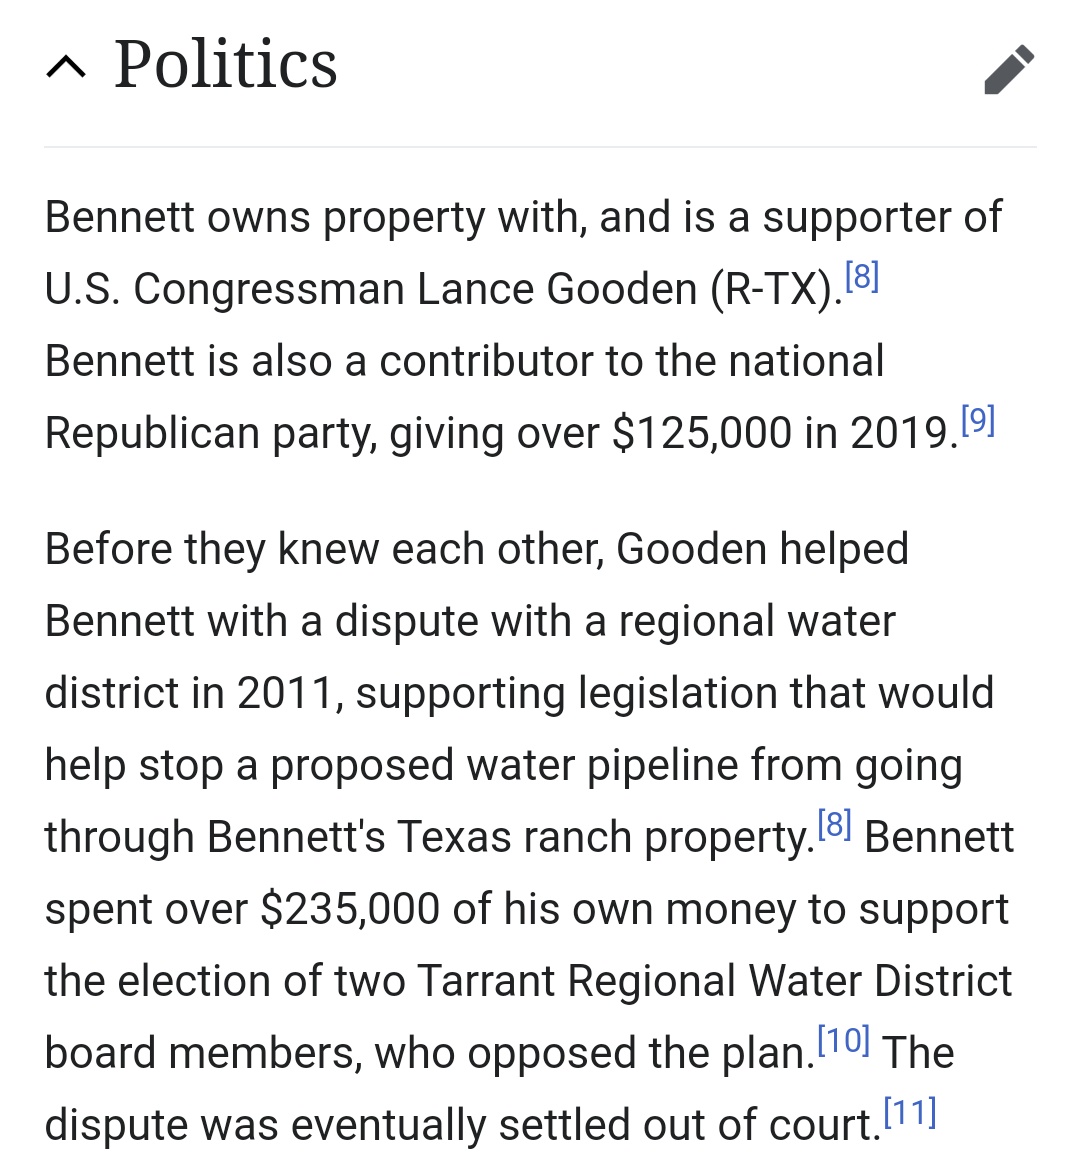 The publisher of the Dallas Express, Monty Bennett, is an extremely wealthy Republican donor who spent hundreds of thousands to influence a water pipeline proposal in Tarrant county. His companies received more PPP funds than any other company. (3/1)